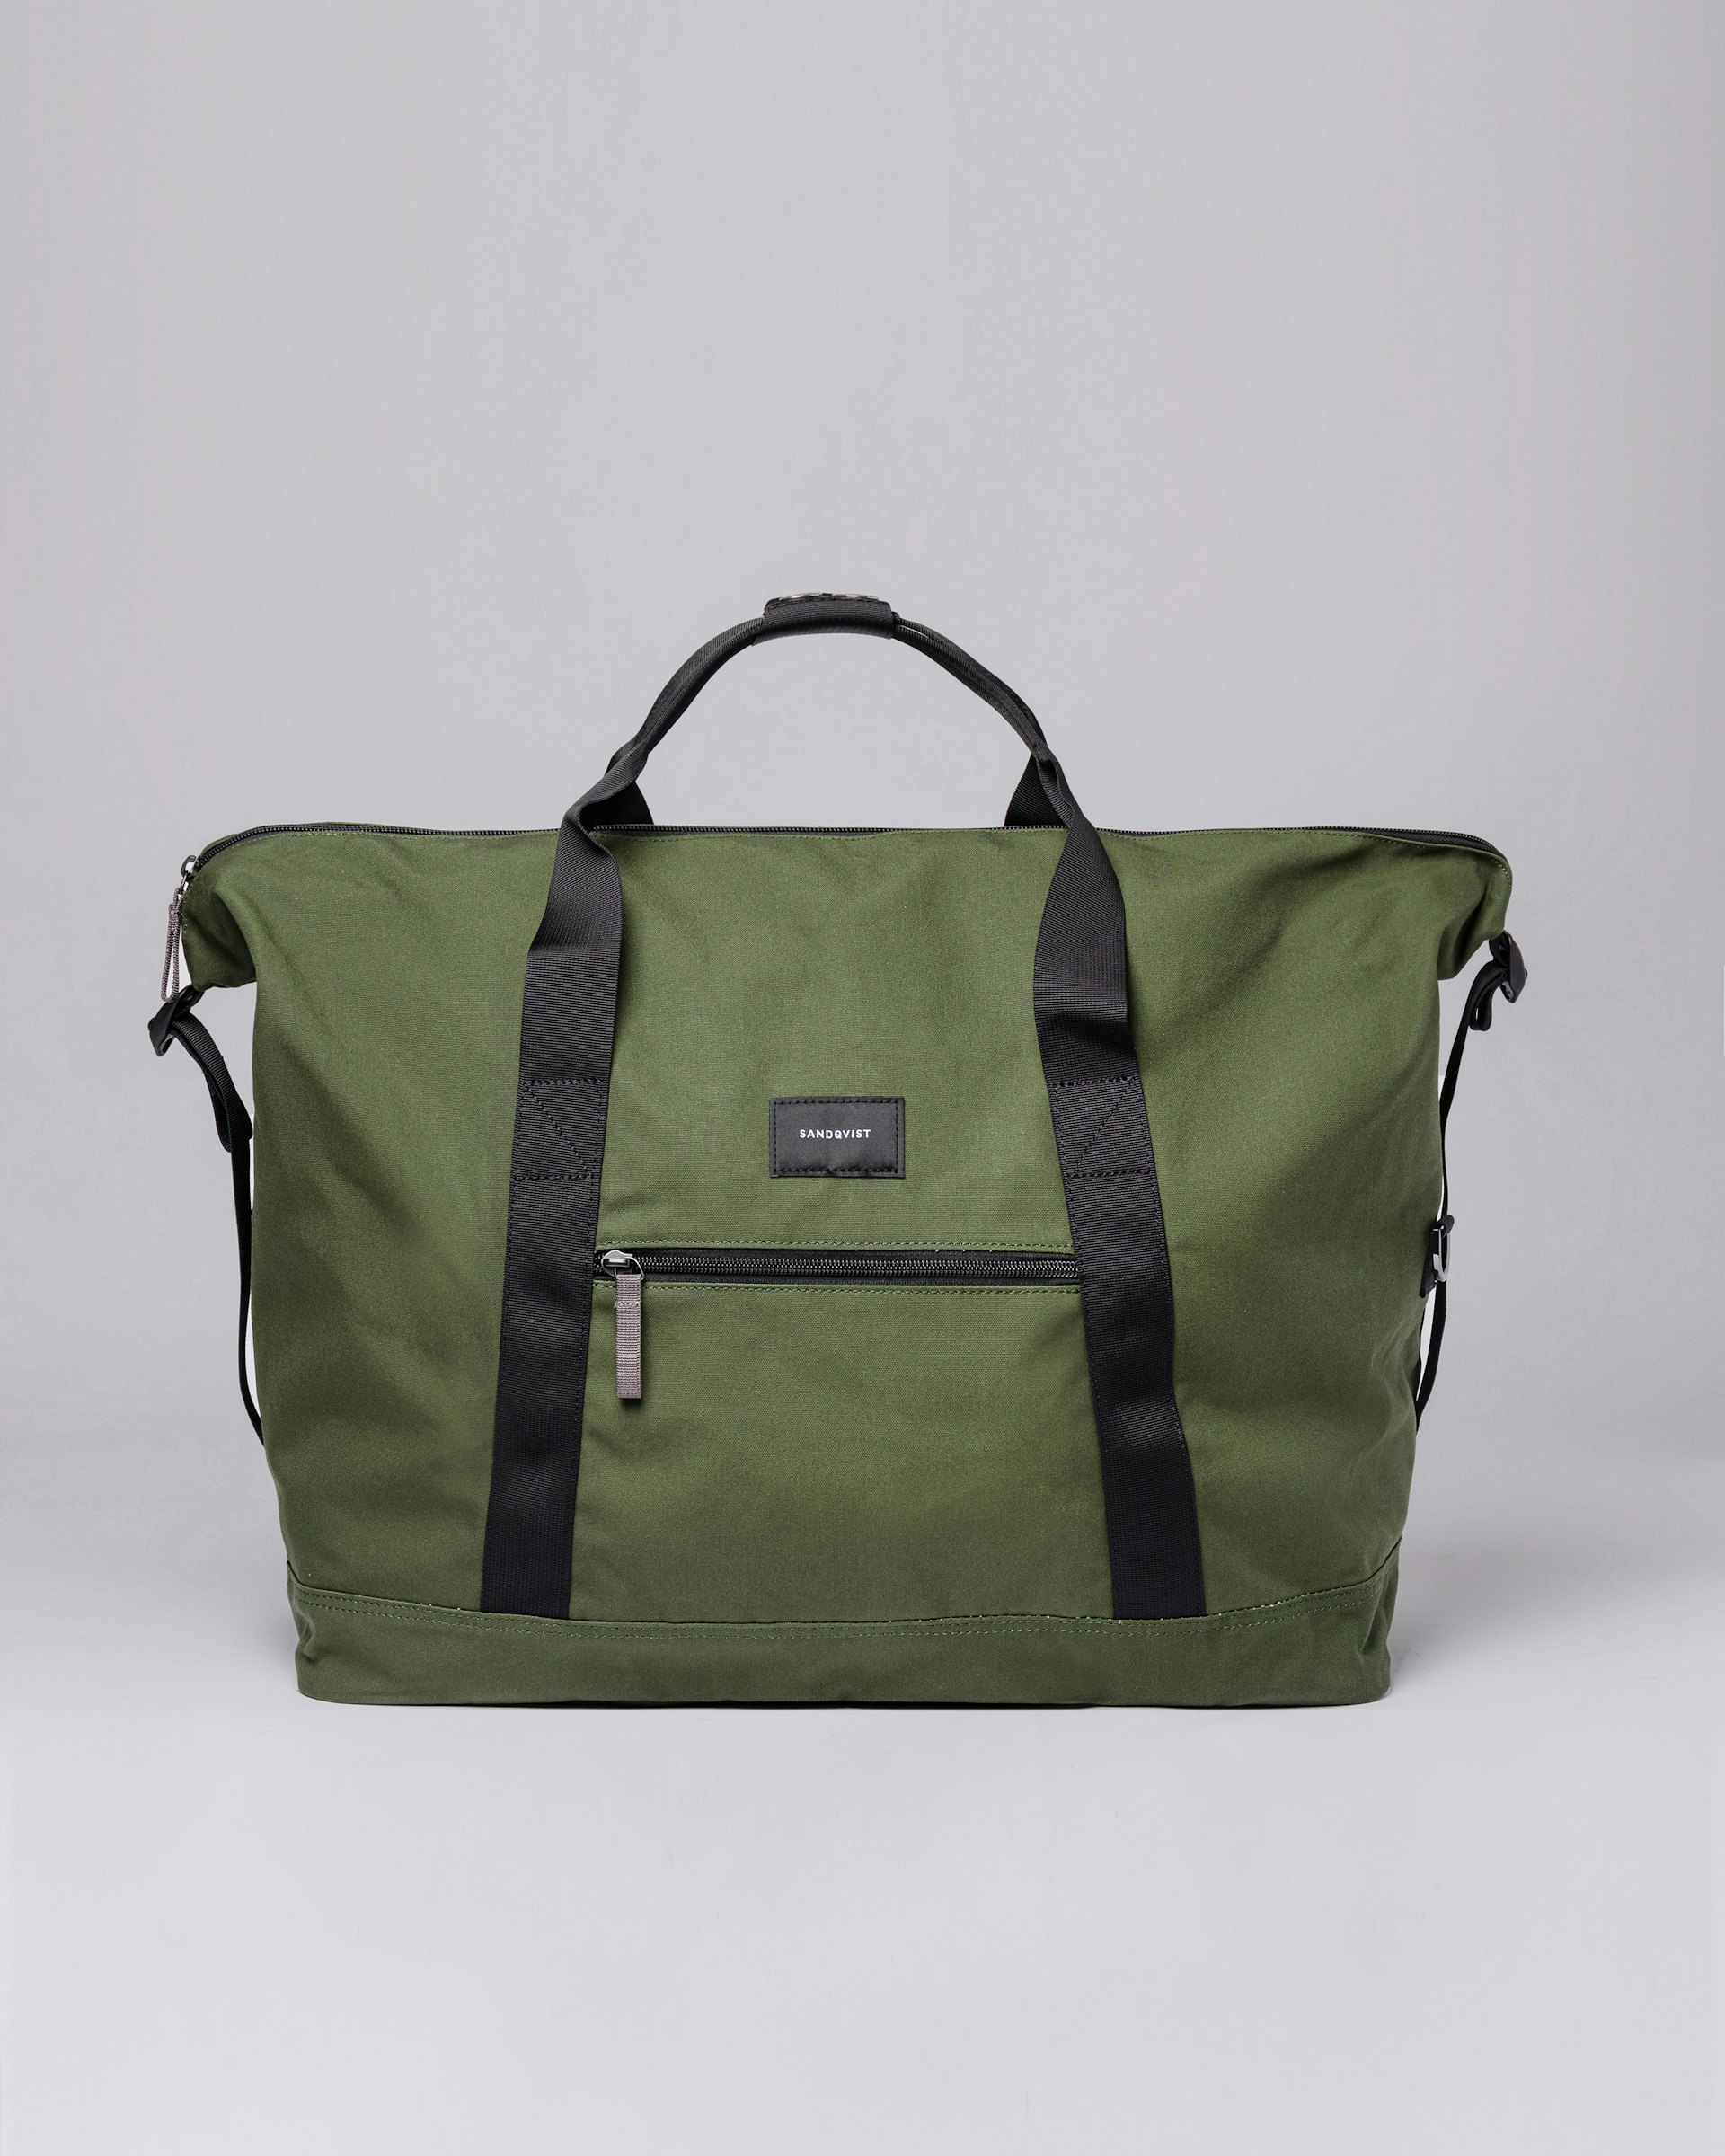 Sture belongs to the category Briefcases and is in color dawn green